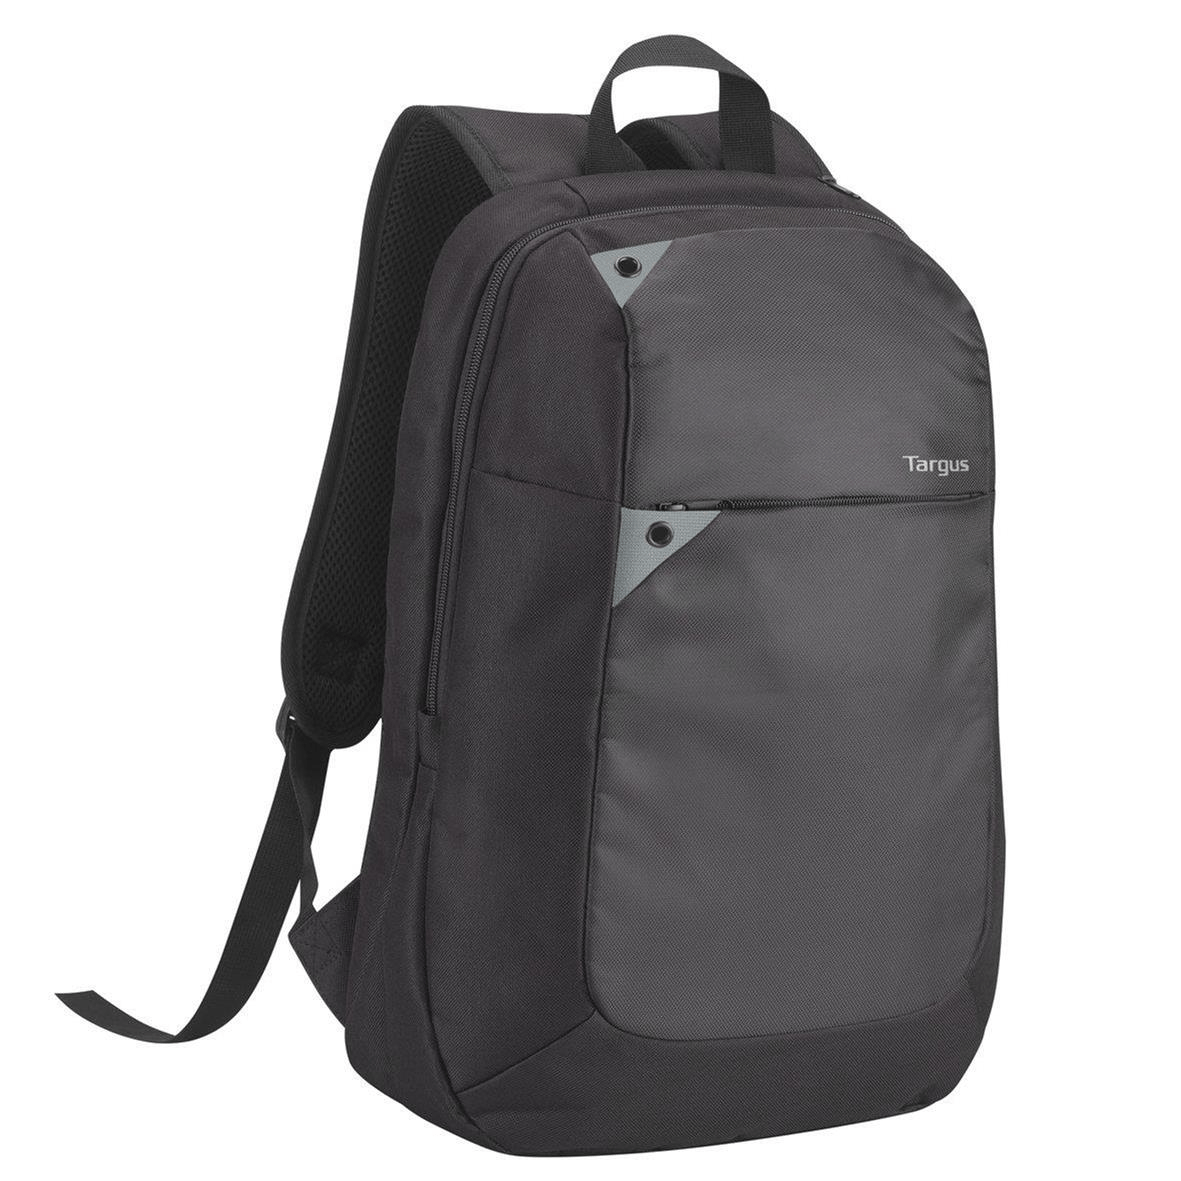 Targus Intellect 15.6-inch Notebook Backpack Black and Grey TBB565GL